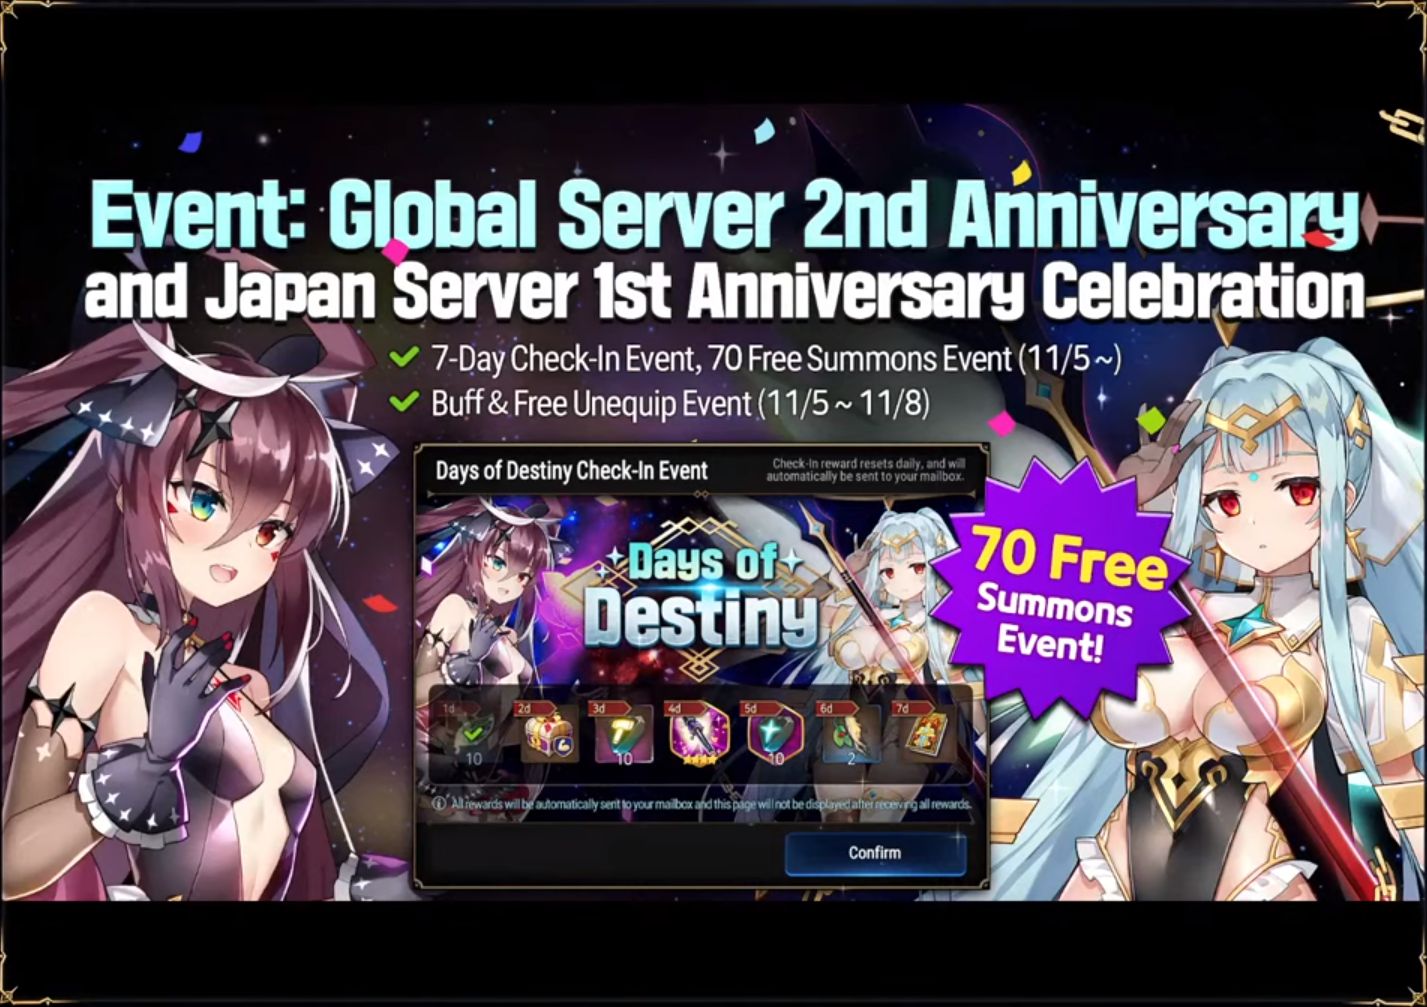 Epic Seven Global Server 2nd Anniversary - 70x Summons, Free Buffs, and Other Goodies in This Upcoming Event